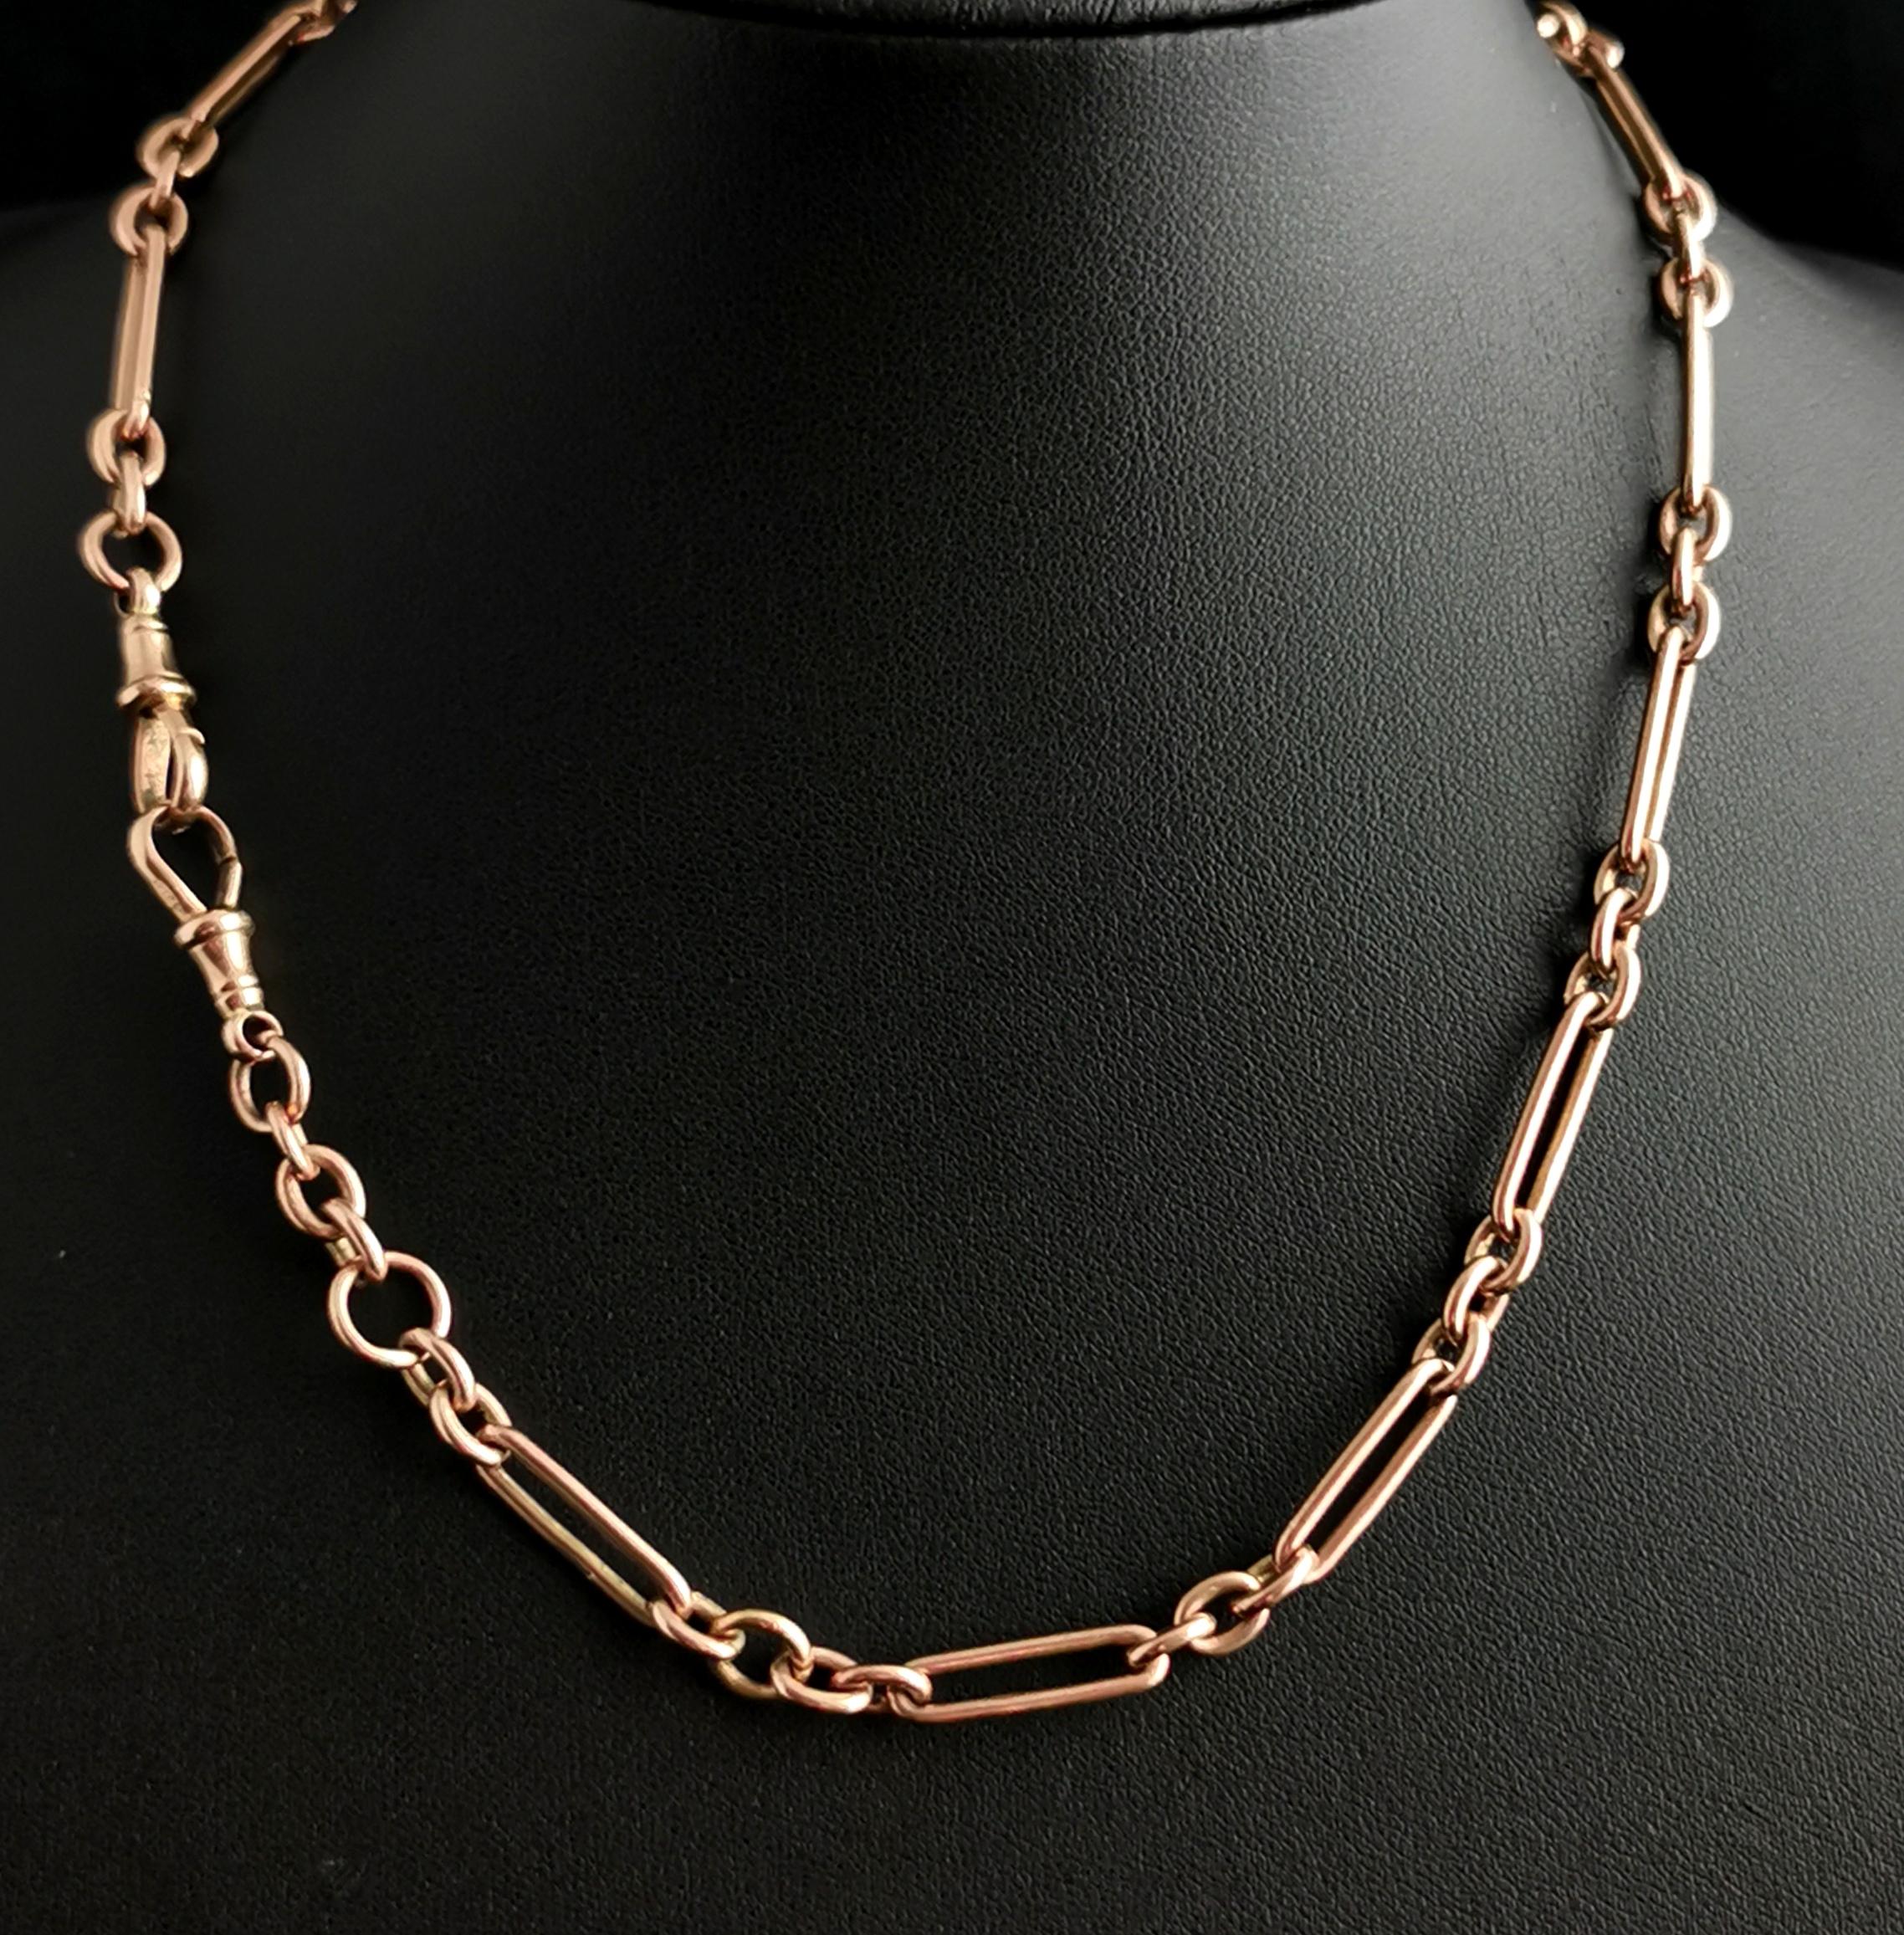 A gorgeous antique Edwardian era 9ct rose gold fancy link watch chain or Albert chain, this is a longer length so could be used as a necklace.

It has fancy trombone links connected with rich rosey gold o rings each stamped 9.375.

It has two gold